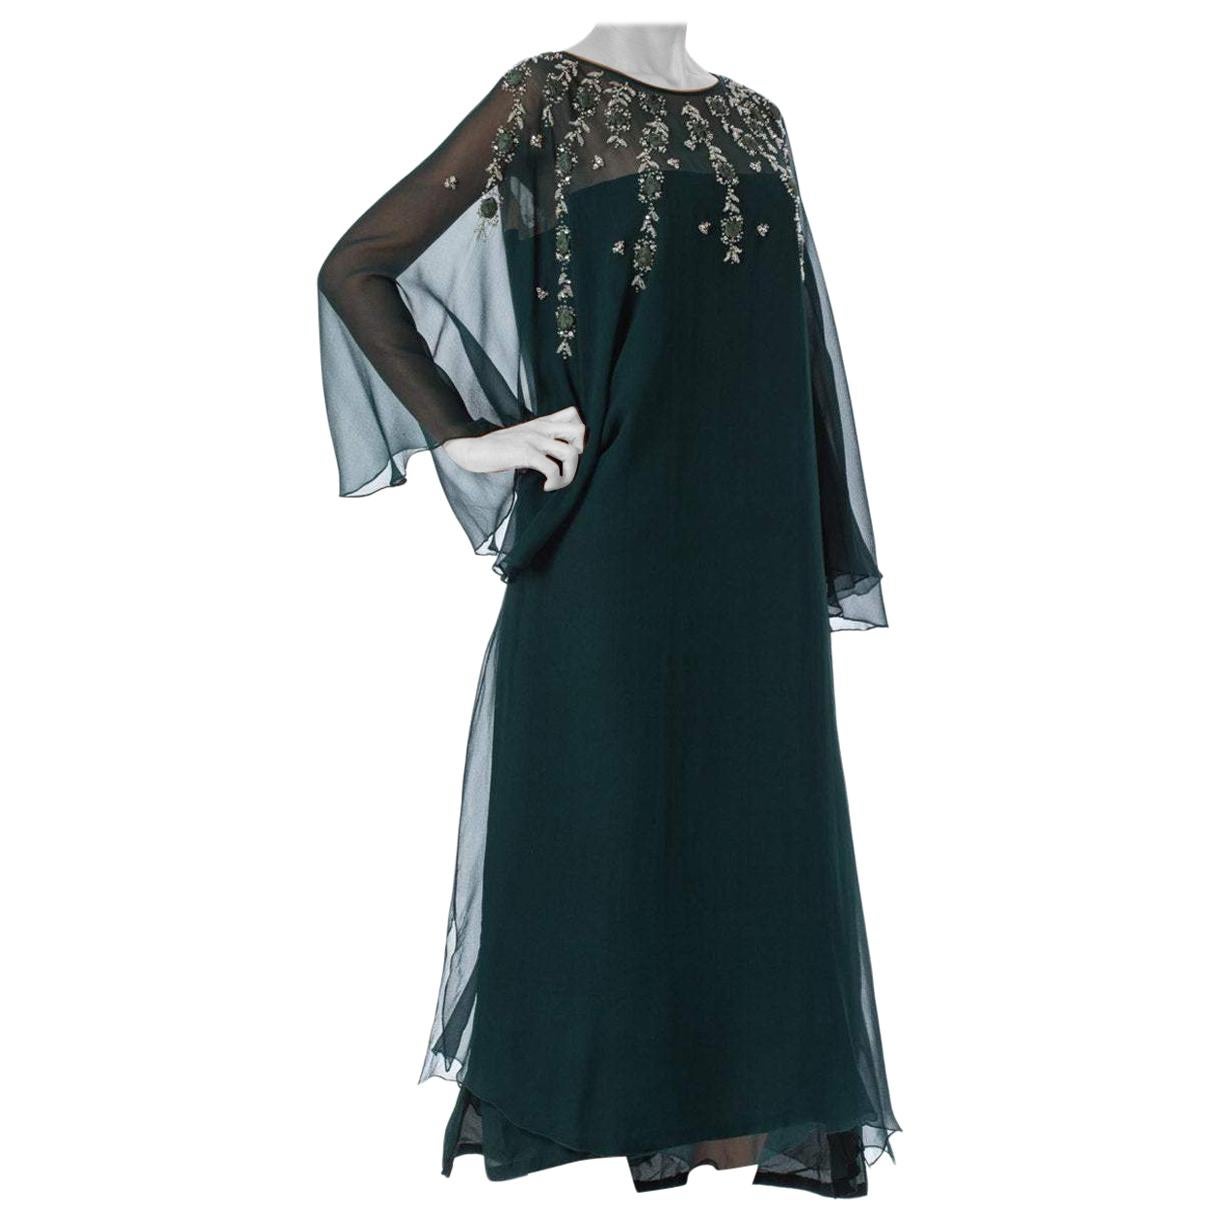 1970S Dark Green Silk Chiffon Cocktail Dress Beaded & Embellished With Rose App